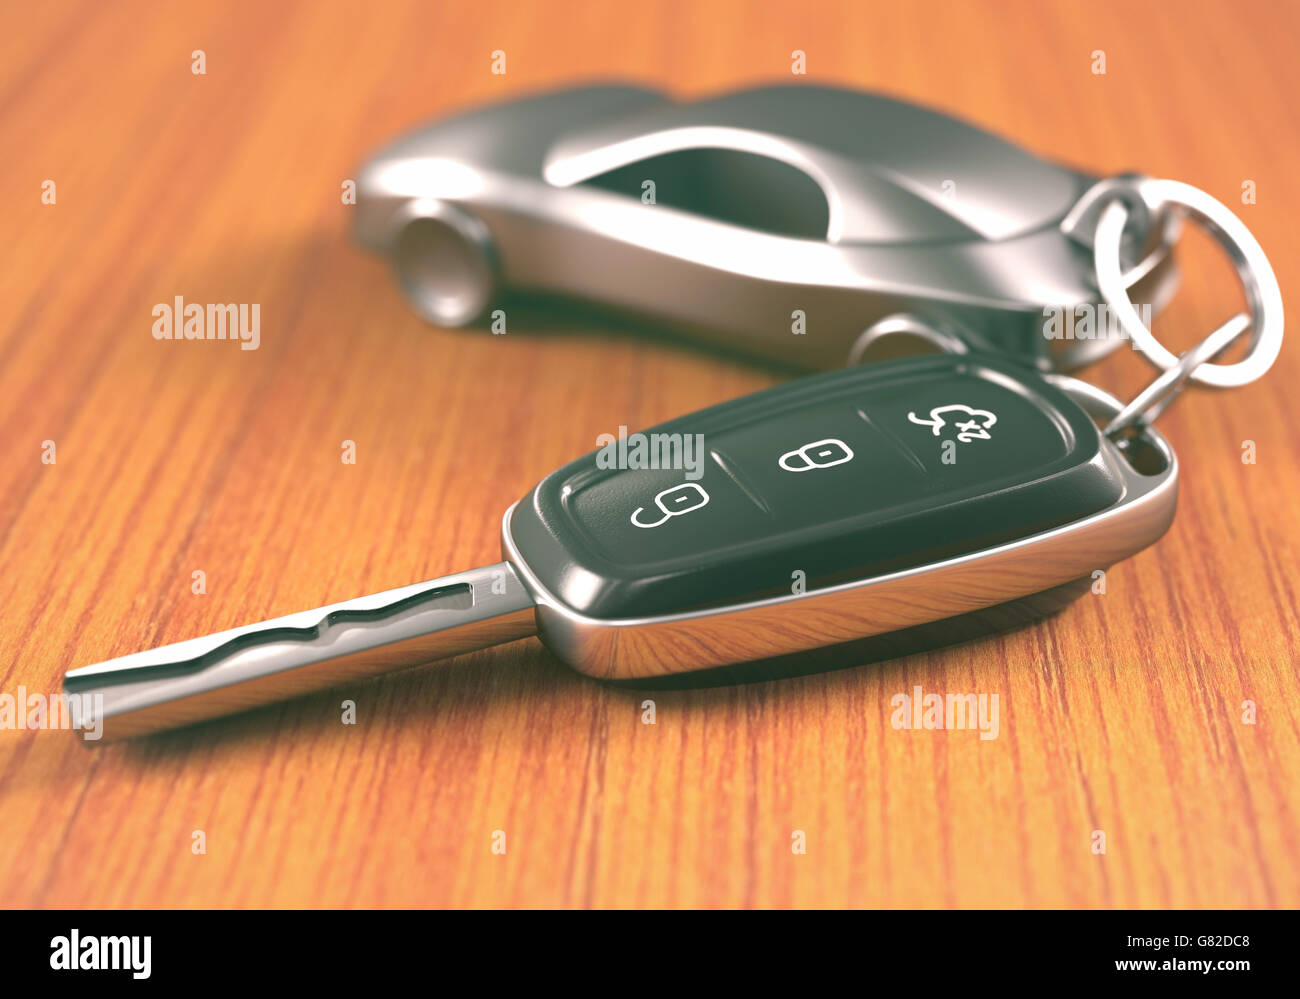 Car key with a car shaped keychain, on a wooden table. Stock Photo